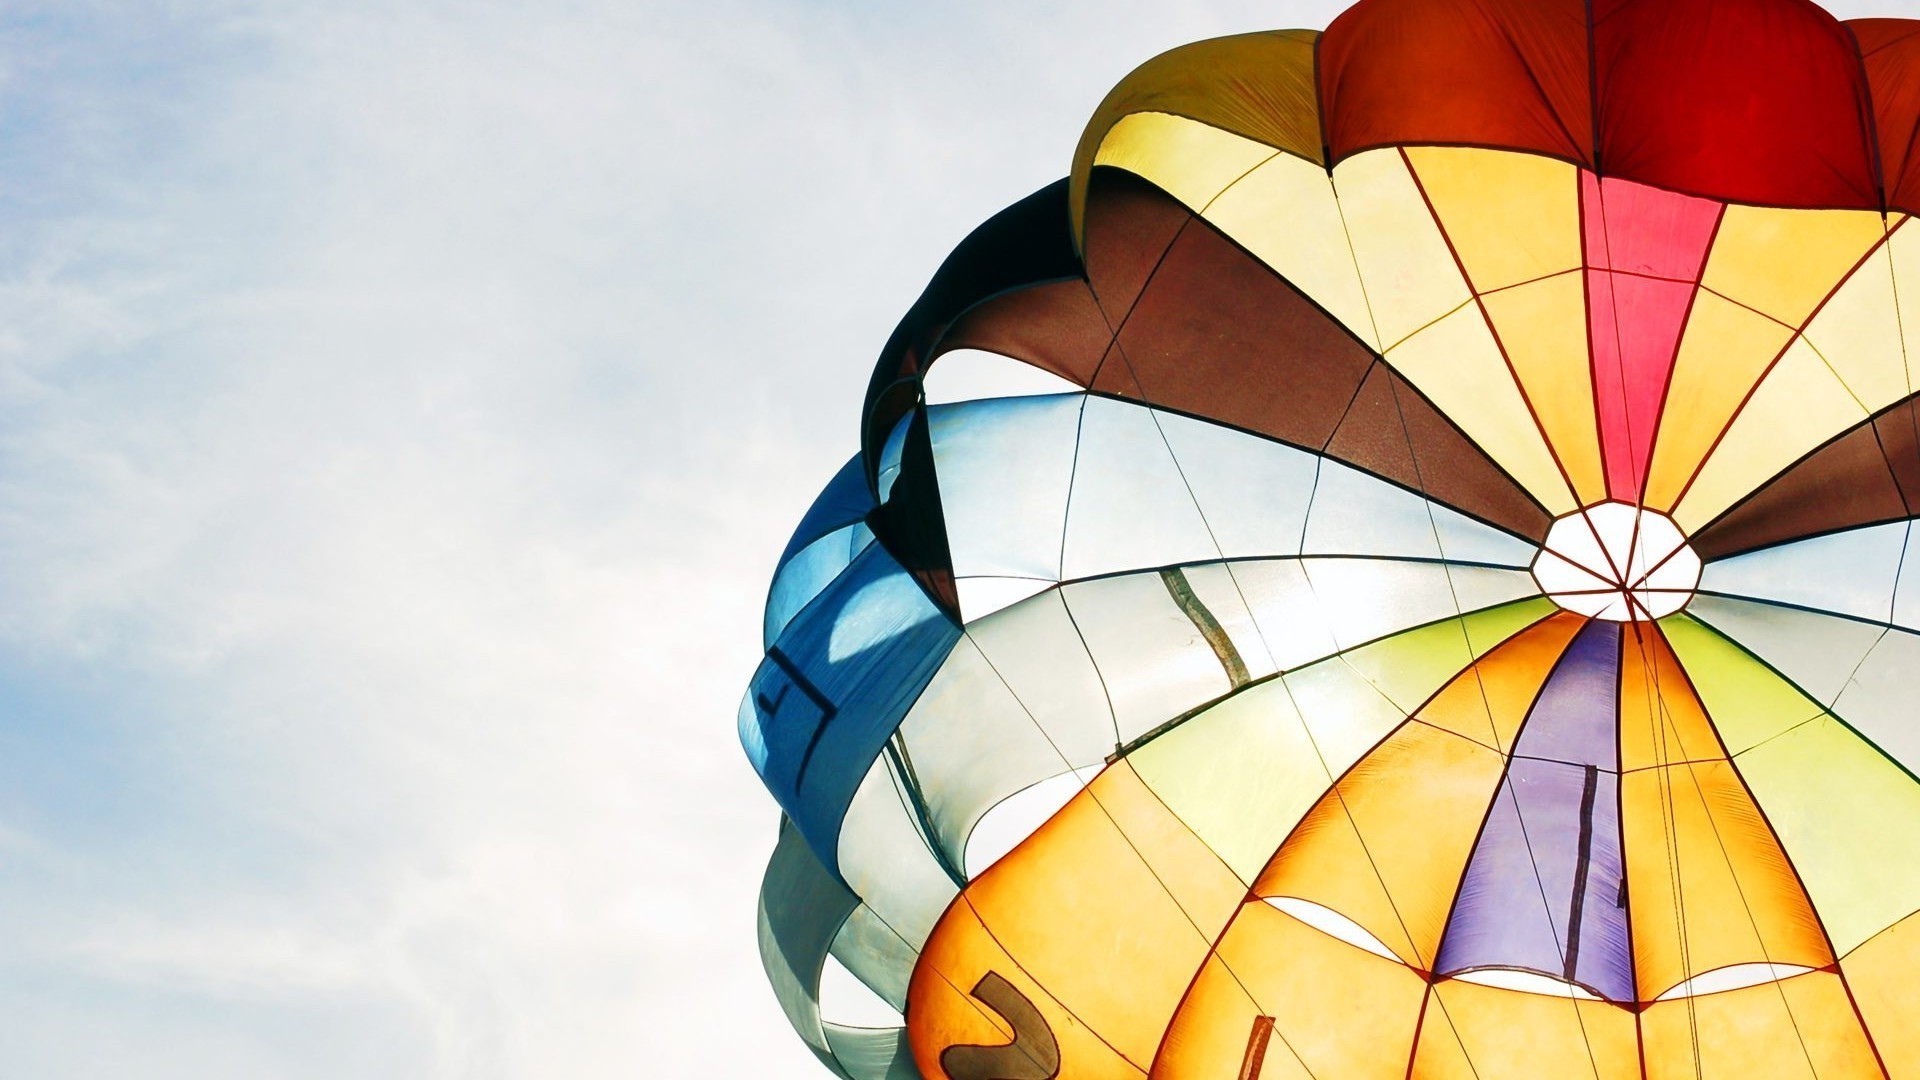 parachutes, Colorful, Clear sky, Photography Wallpaper